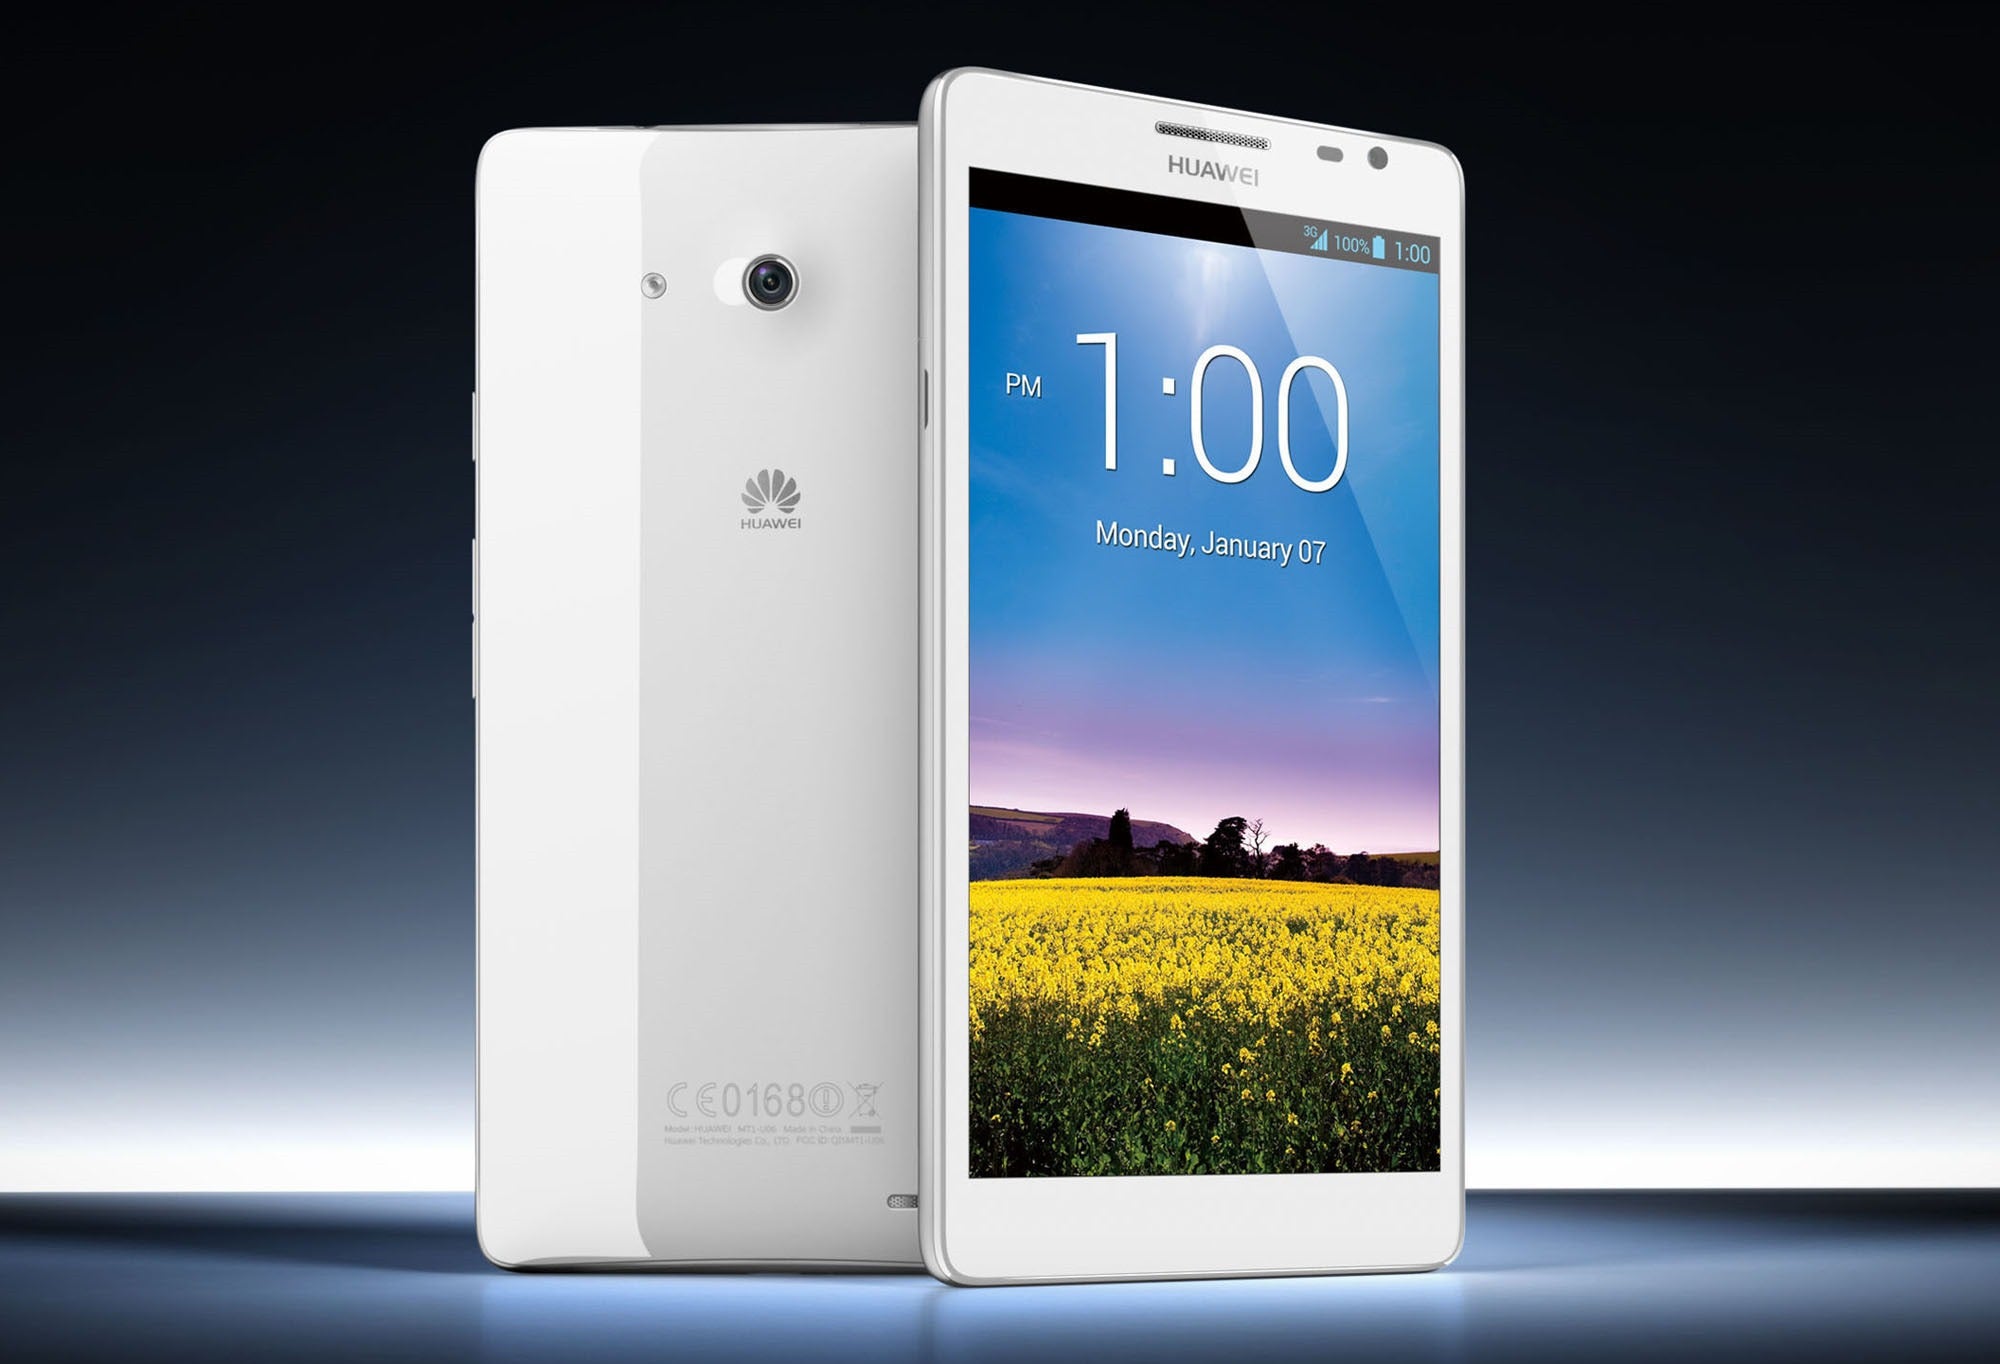 The sequel to the Huawei Ascend Mate could carry an 8 core processor - Huawei&#039;s Yu says super slim P series model to be displayed at MWC; 8-core chip coming